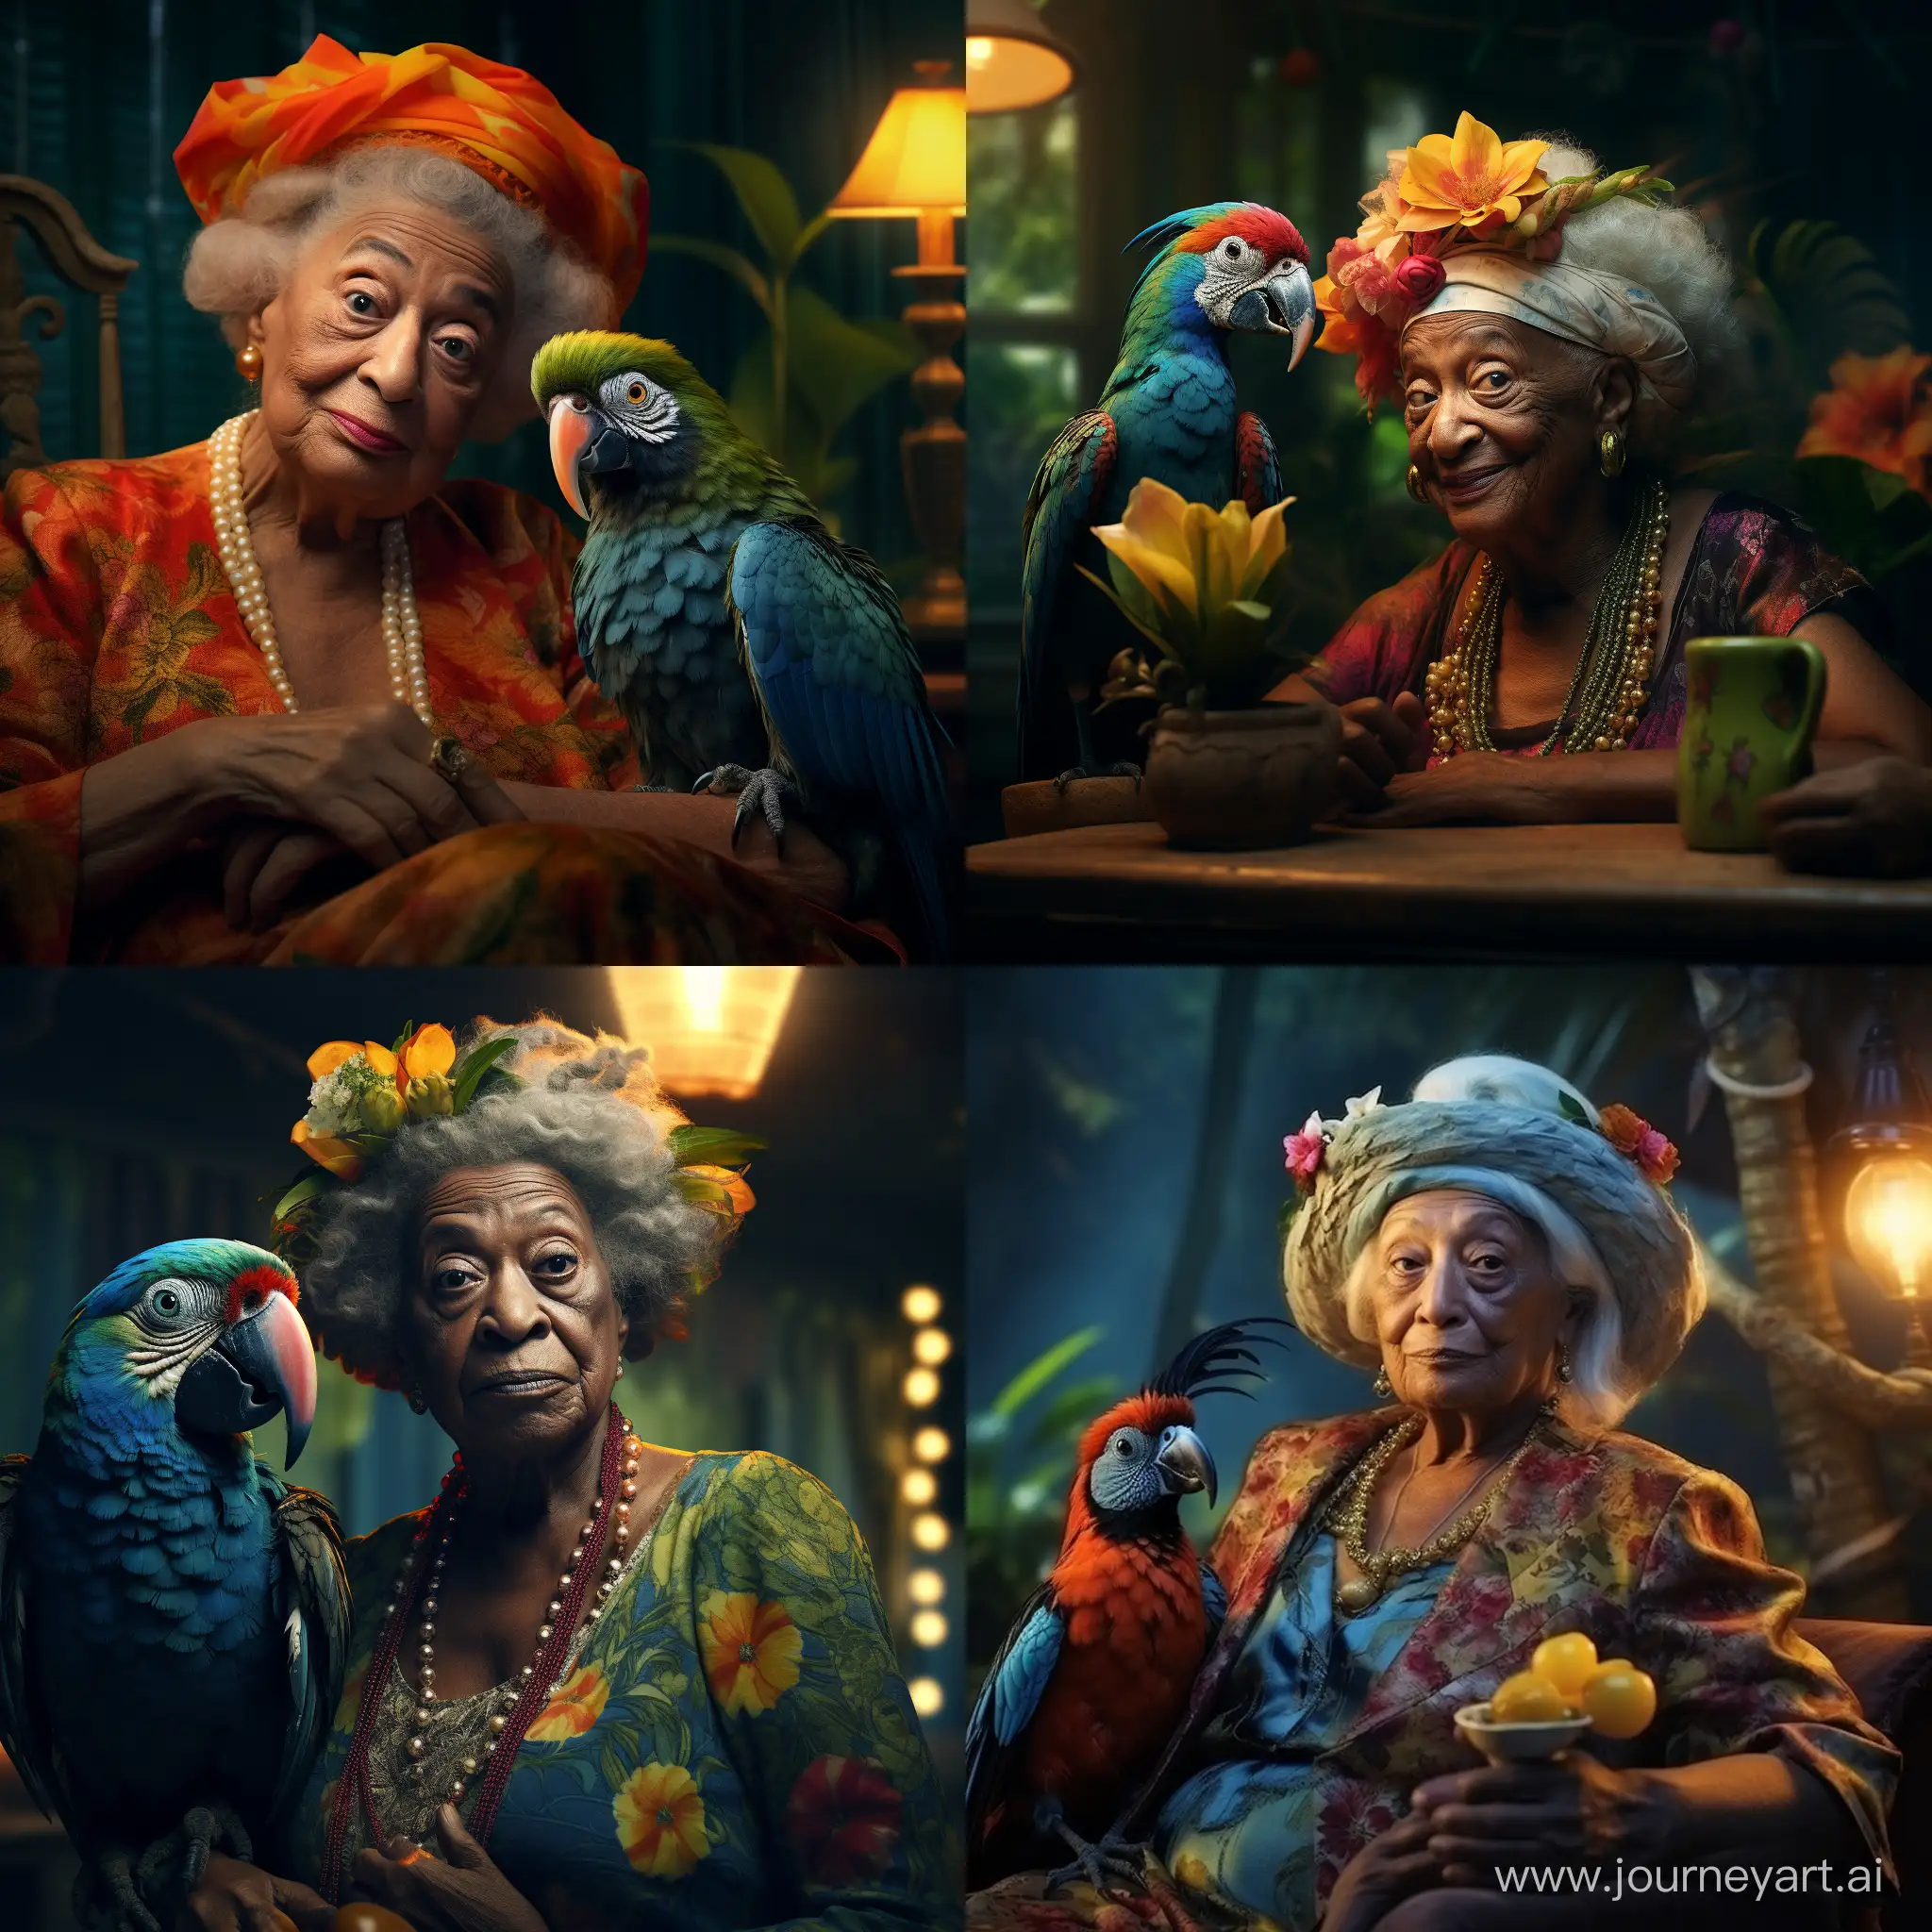 A beautiful award winning portrait of an eccentric old lady from Jamaica with her pet tropical bird, Rembrandt lighting, colour graded, strong vignette, exquisite details, playful, in Pixar style